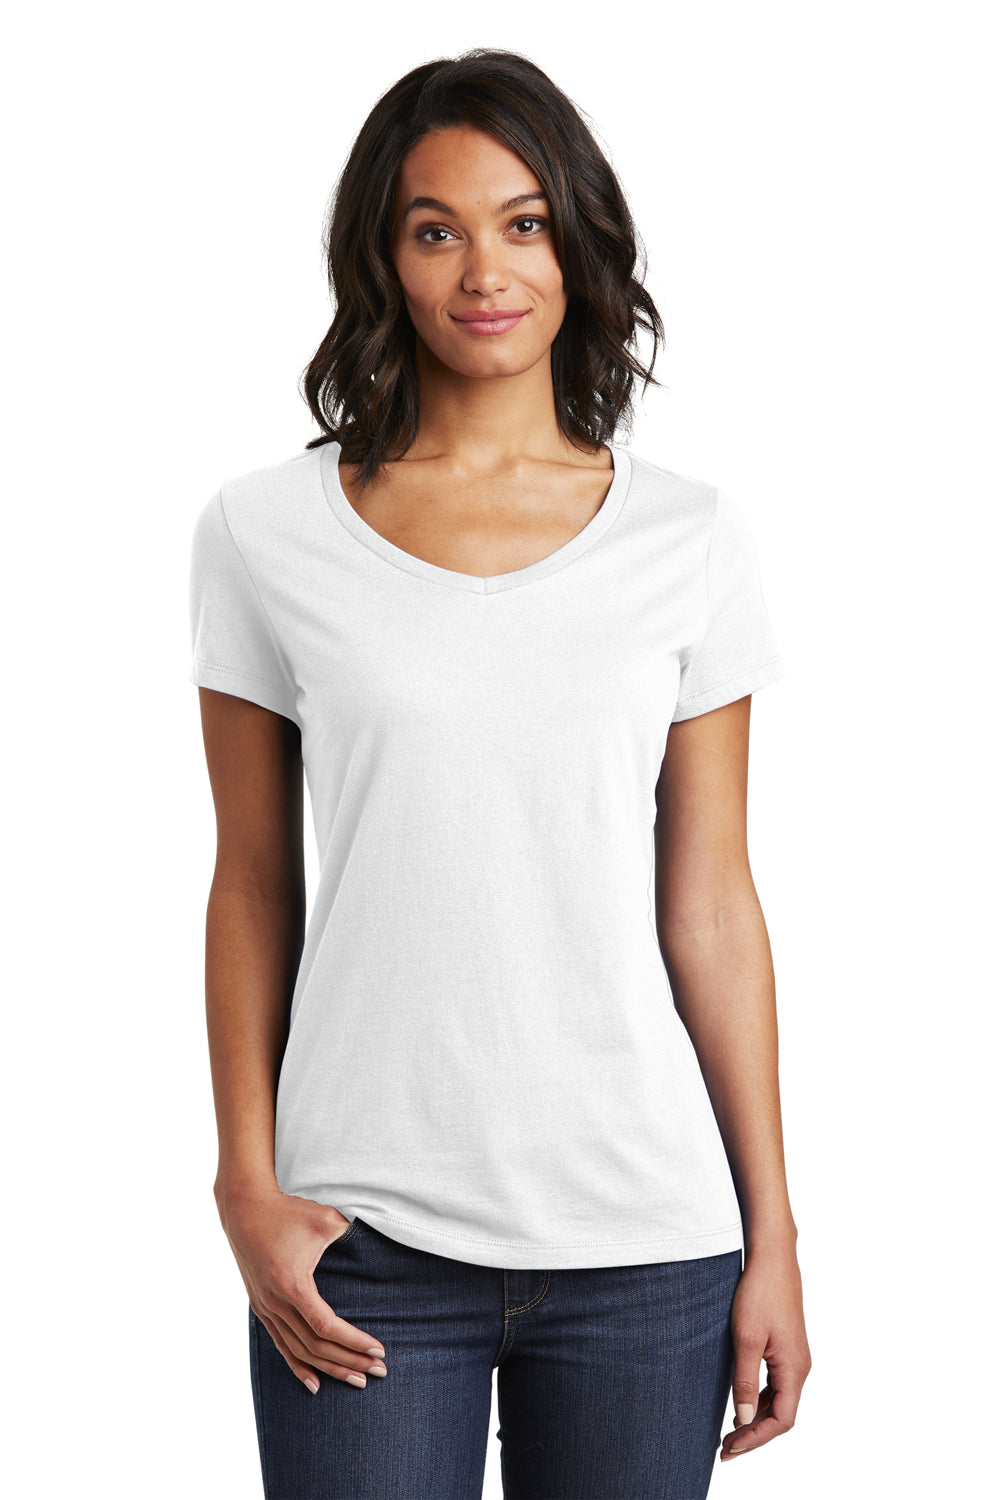 District DT6503 Womens Very Important Short Sleeve V-Neck T-Shirt White Front